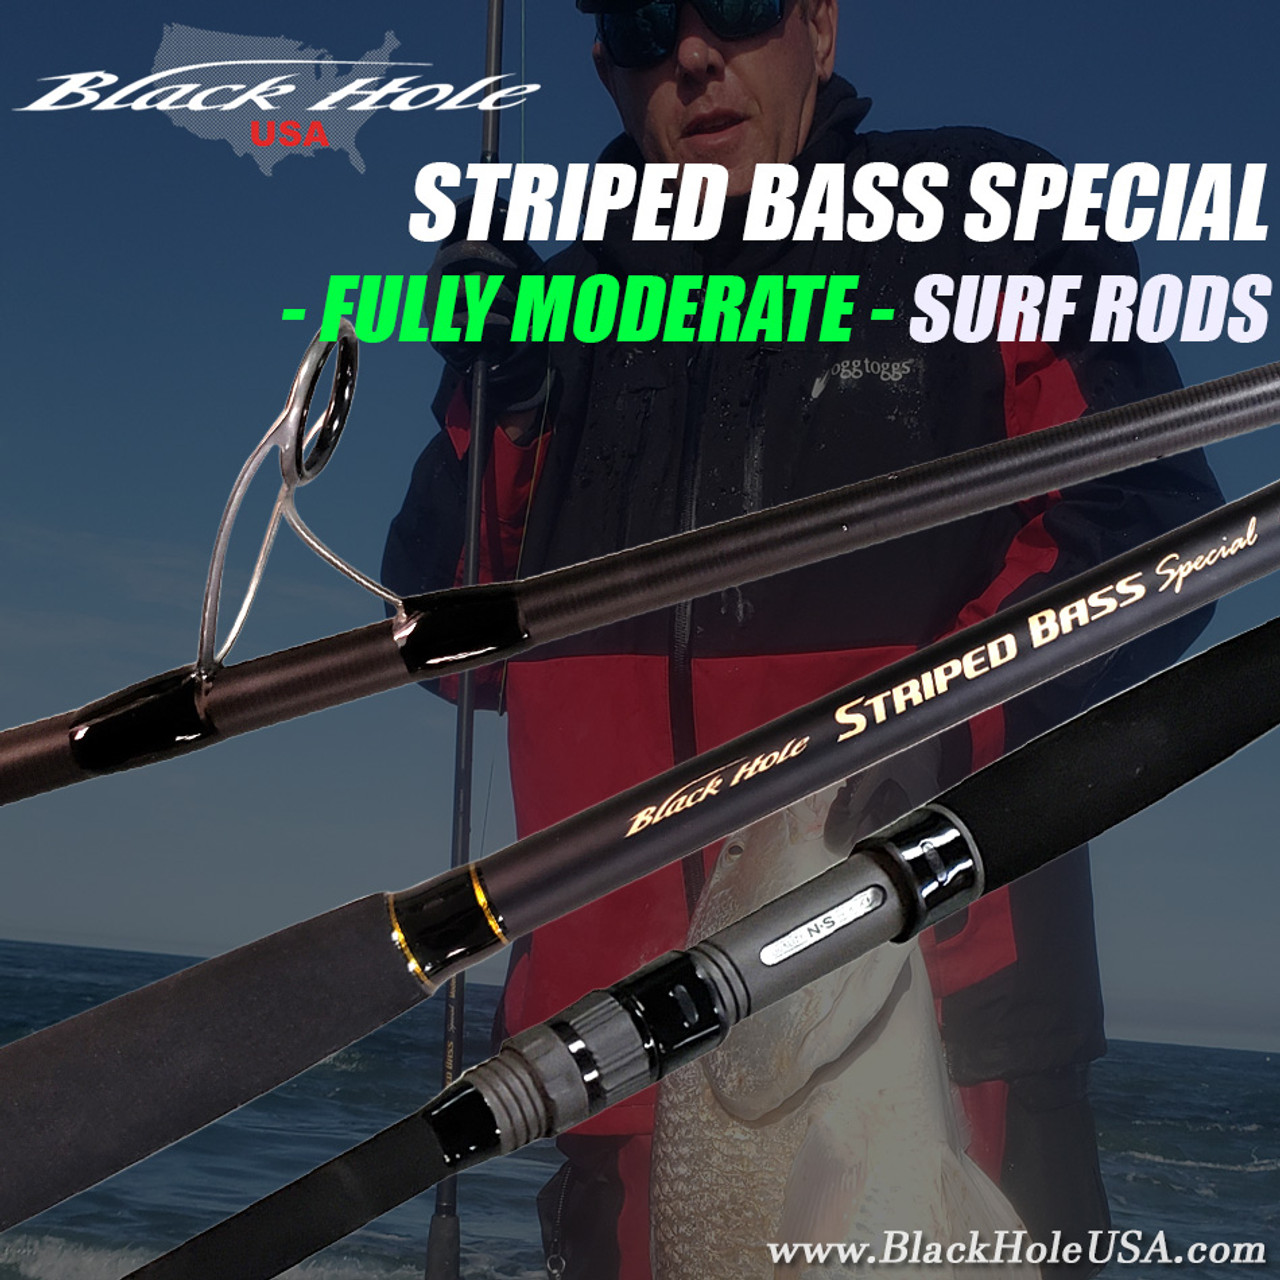 Black Hole USA Striped Bass Special FULLY MODERATE Surf Rods, Black Hole USA,  Striped Bass